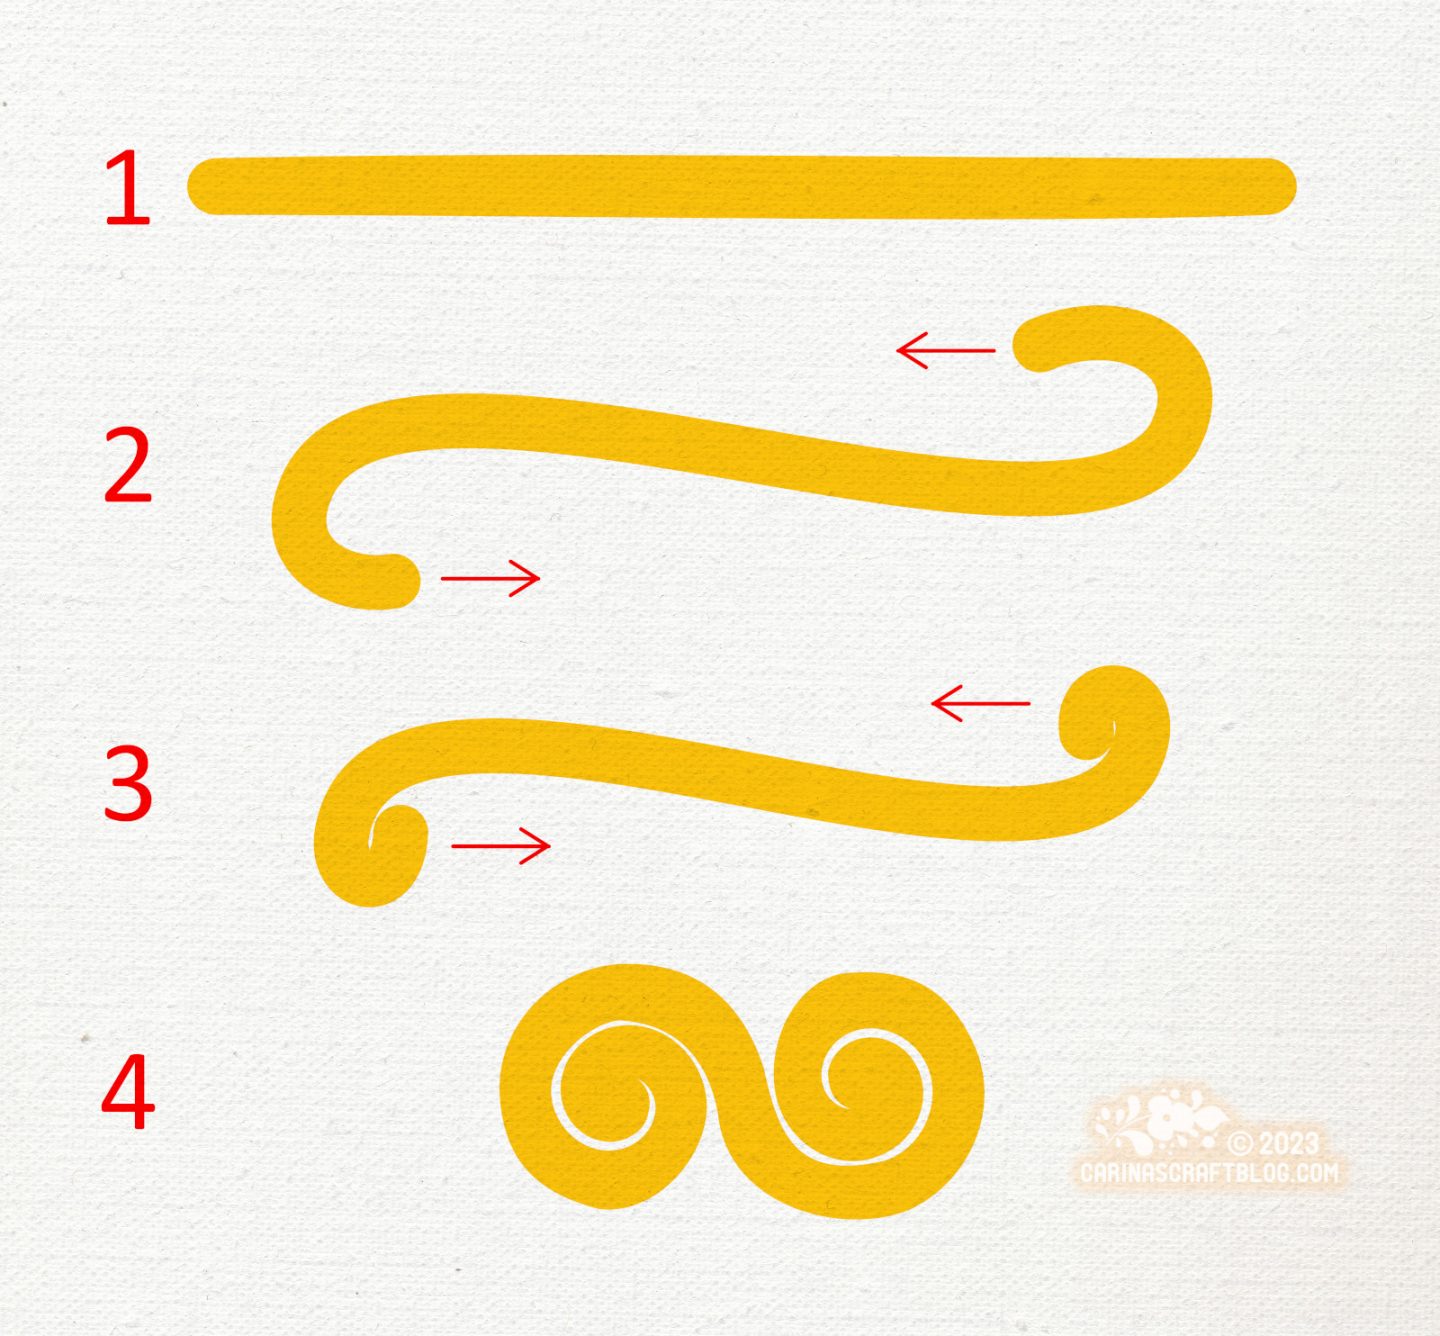 Diagram showing how to roll lussekatter shapes. from a long sausage shape to an S shape.